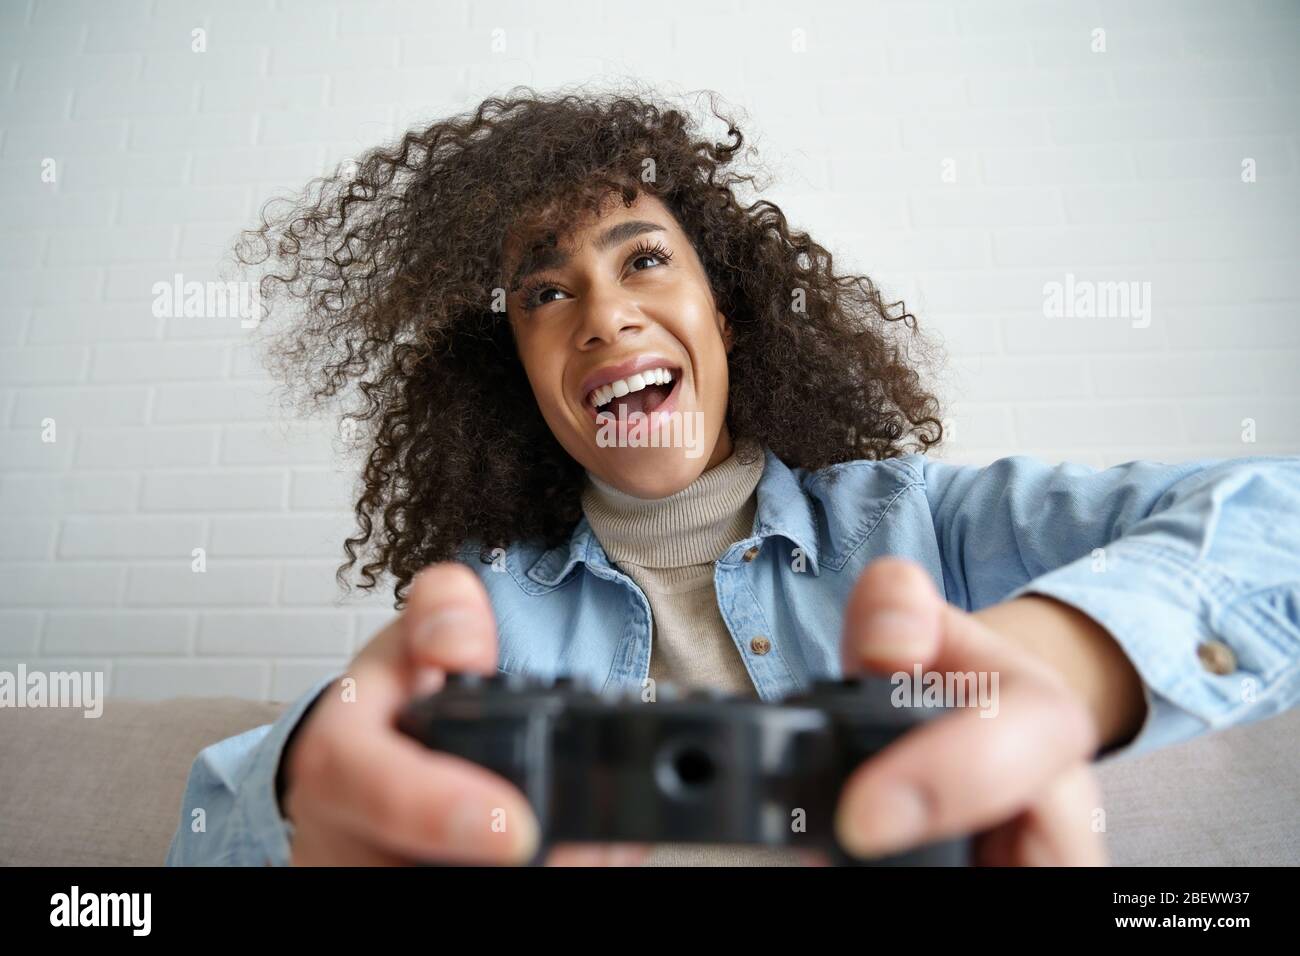 Excited african girl gamer holding joystick controller playing video game. Stock Photo